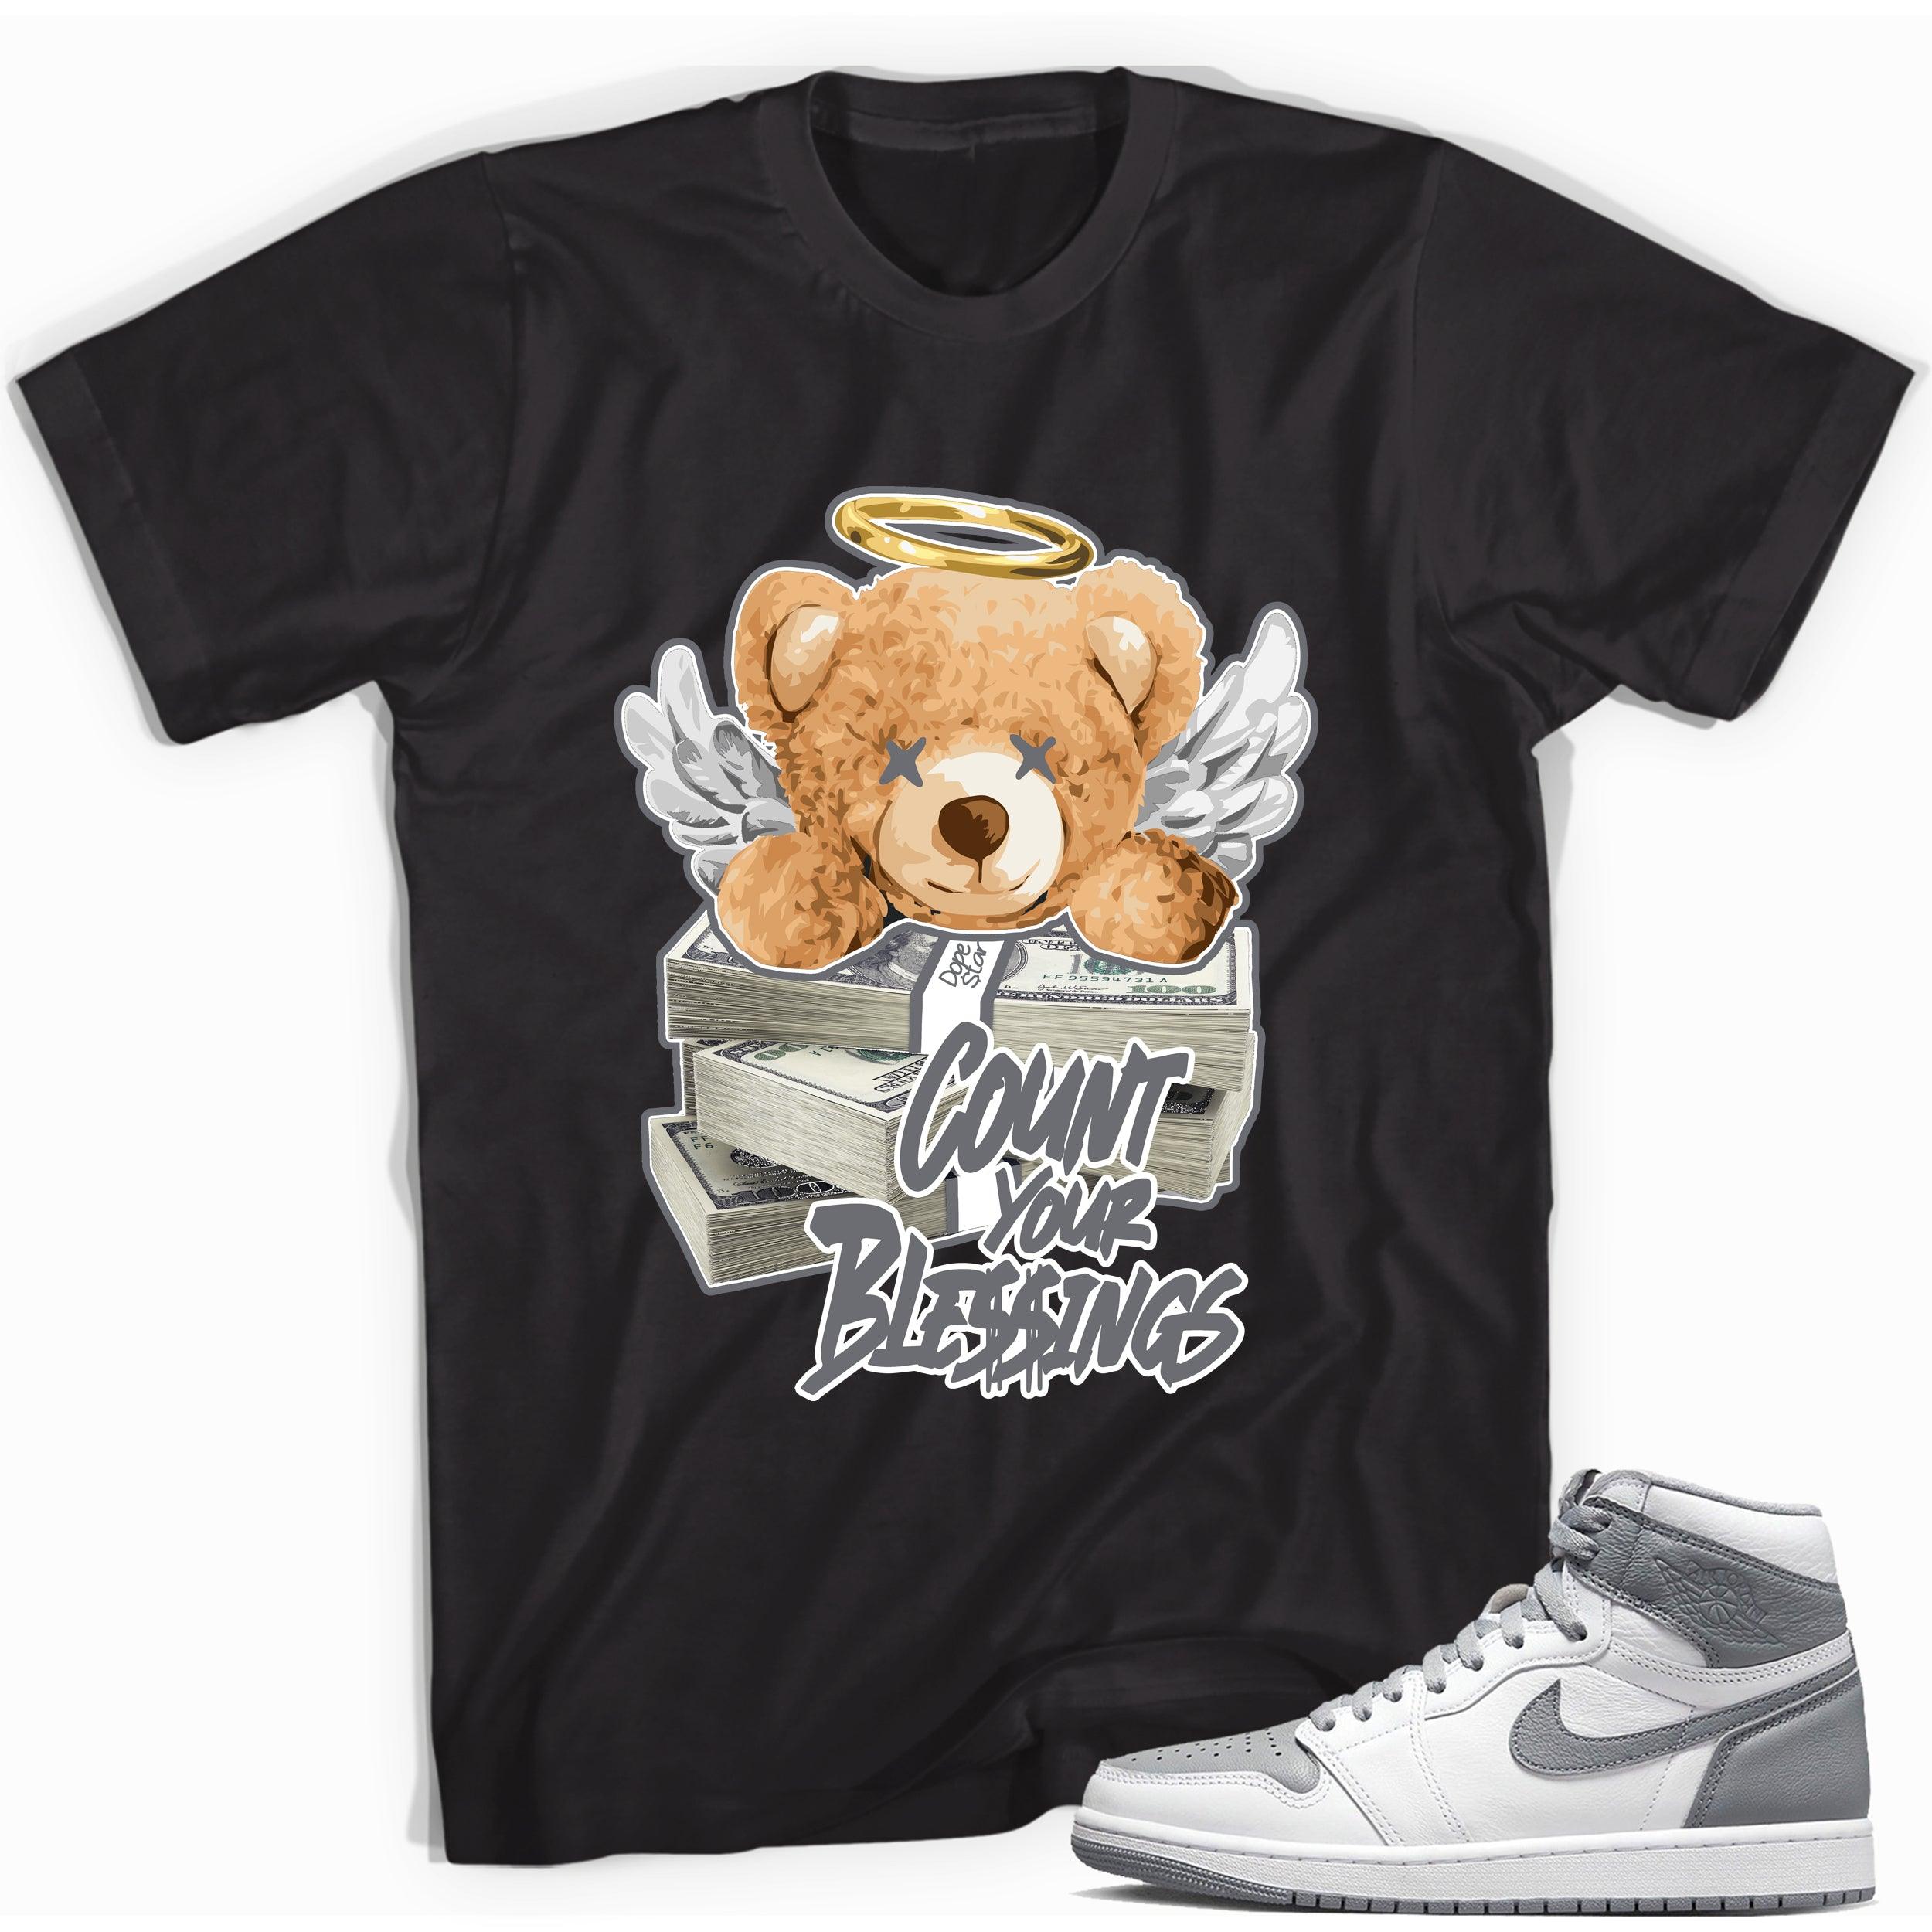 Cool Black Count Your Blessings bear Shirt To Match Air Jordan 1 Stealth sneakers 